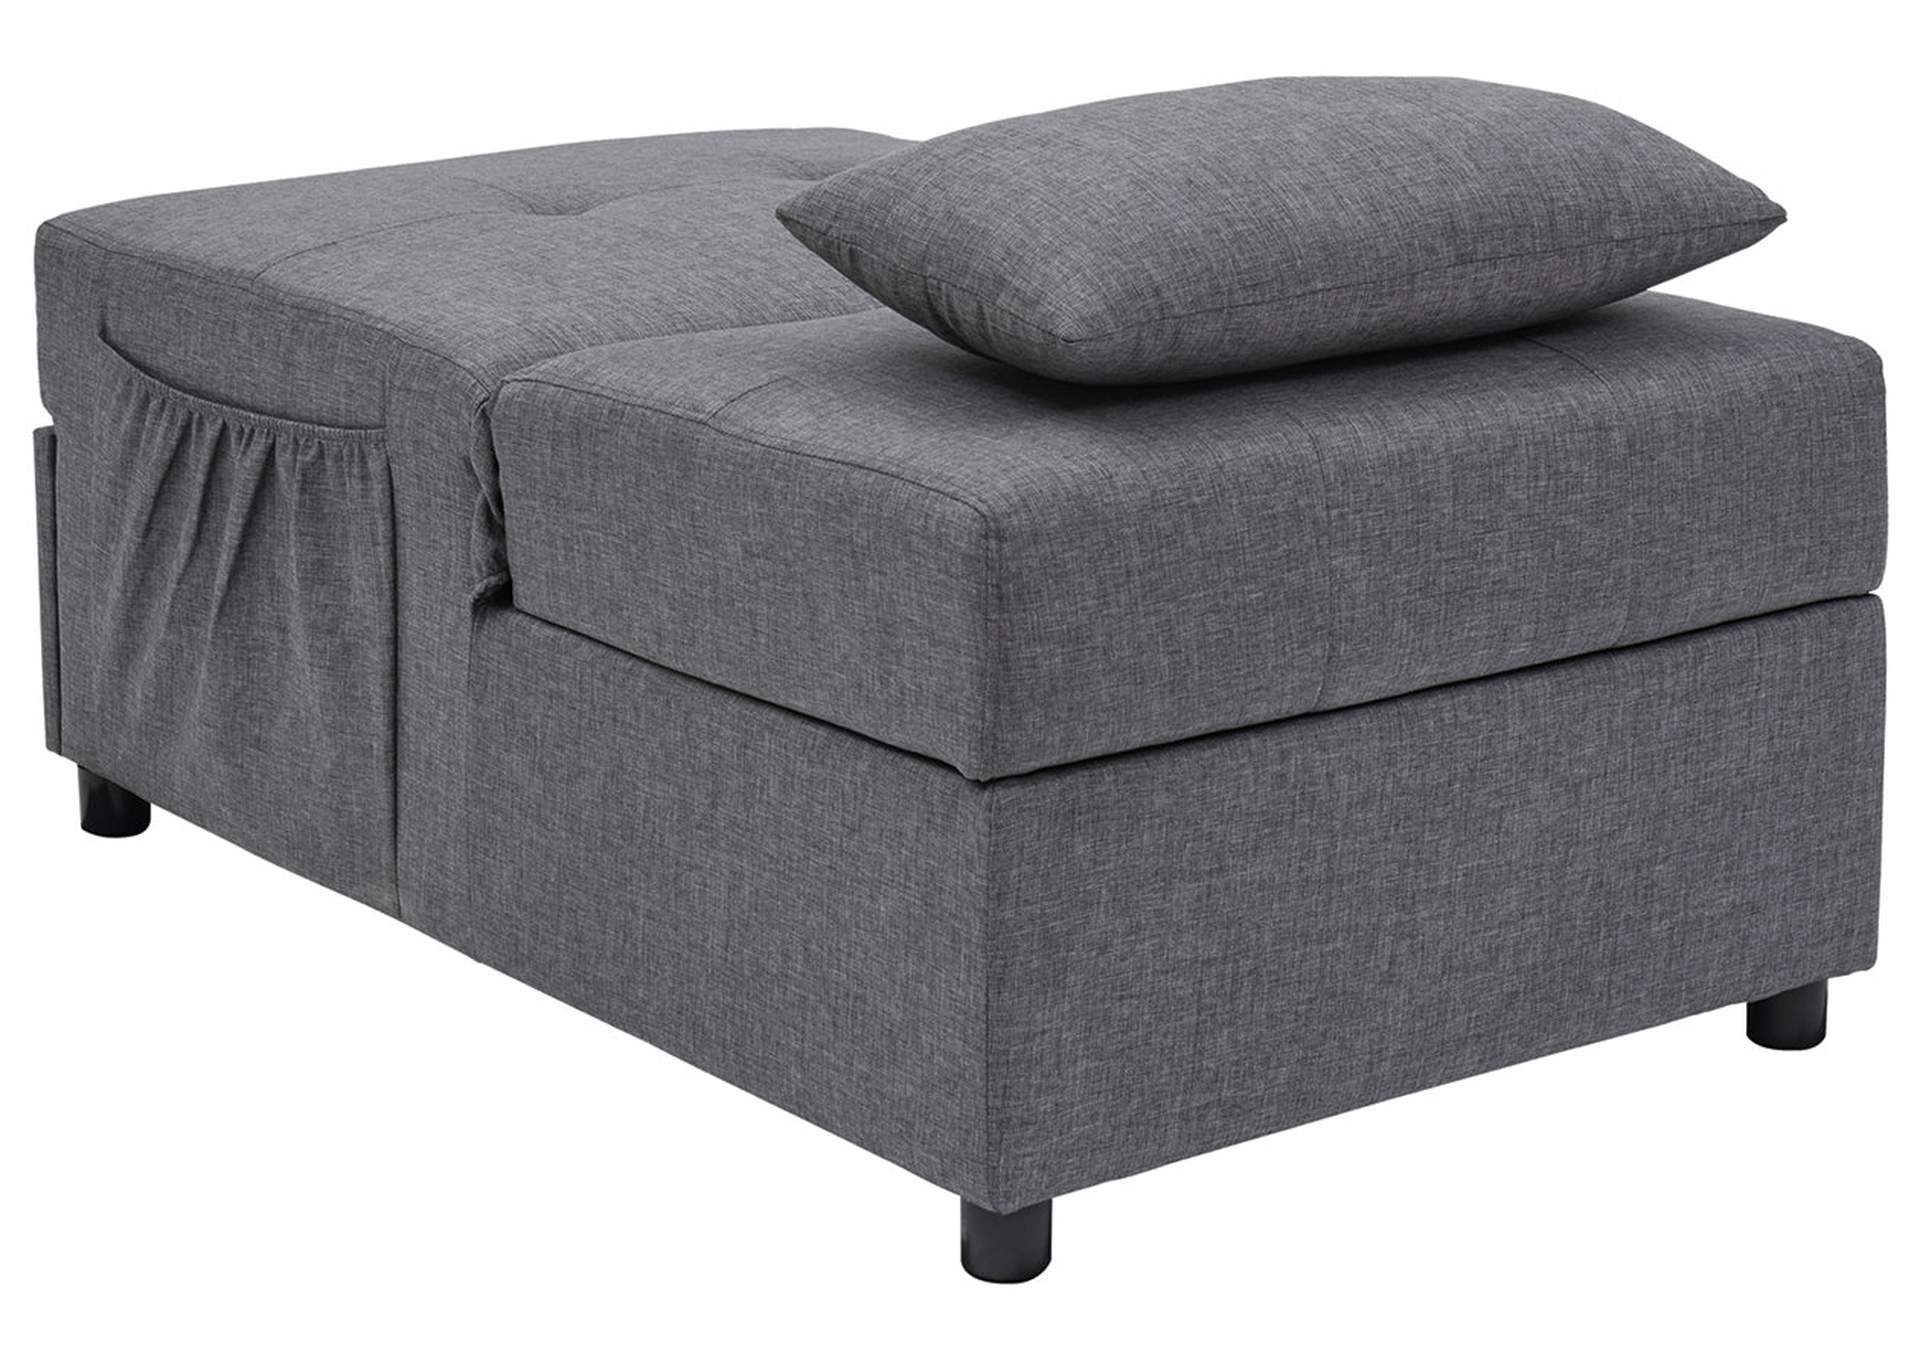 Thrall Single Seat Pop Up Sleeper,Signature Design By Ashley